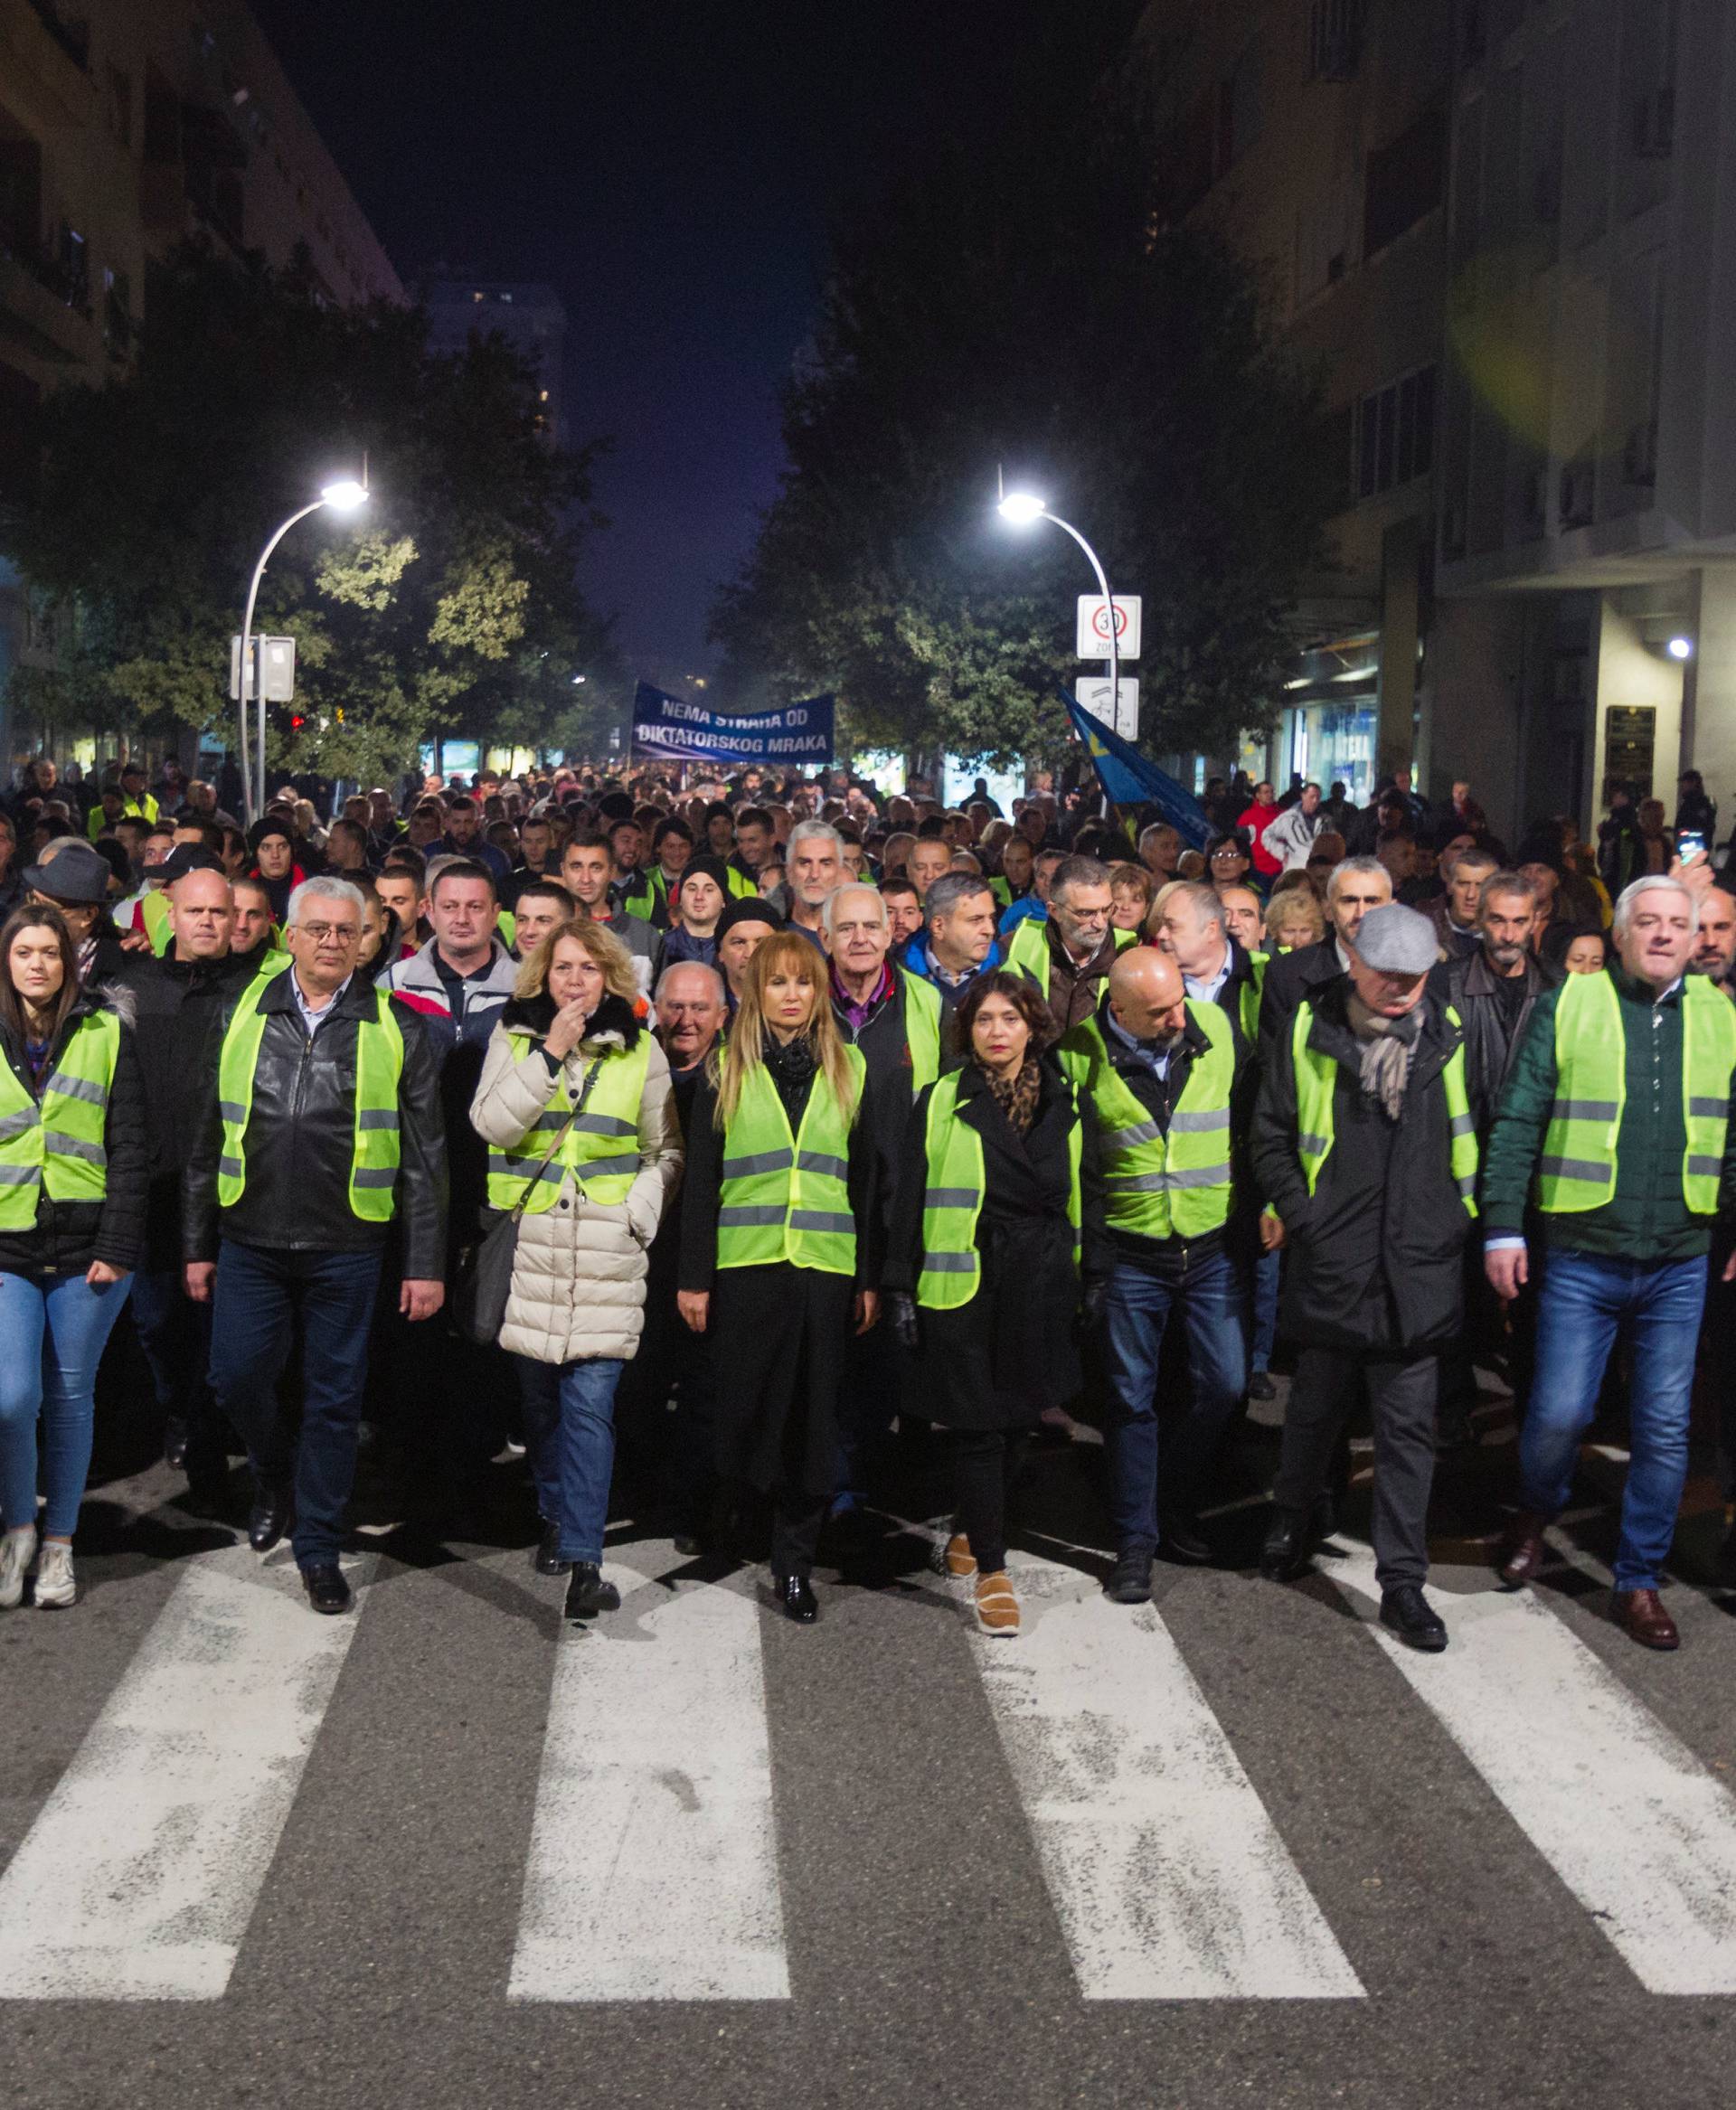 Protesters wearing yellow vests march against the arrest of Nebojsa Medojevic in Podgorica